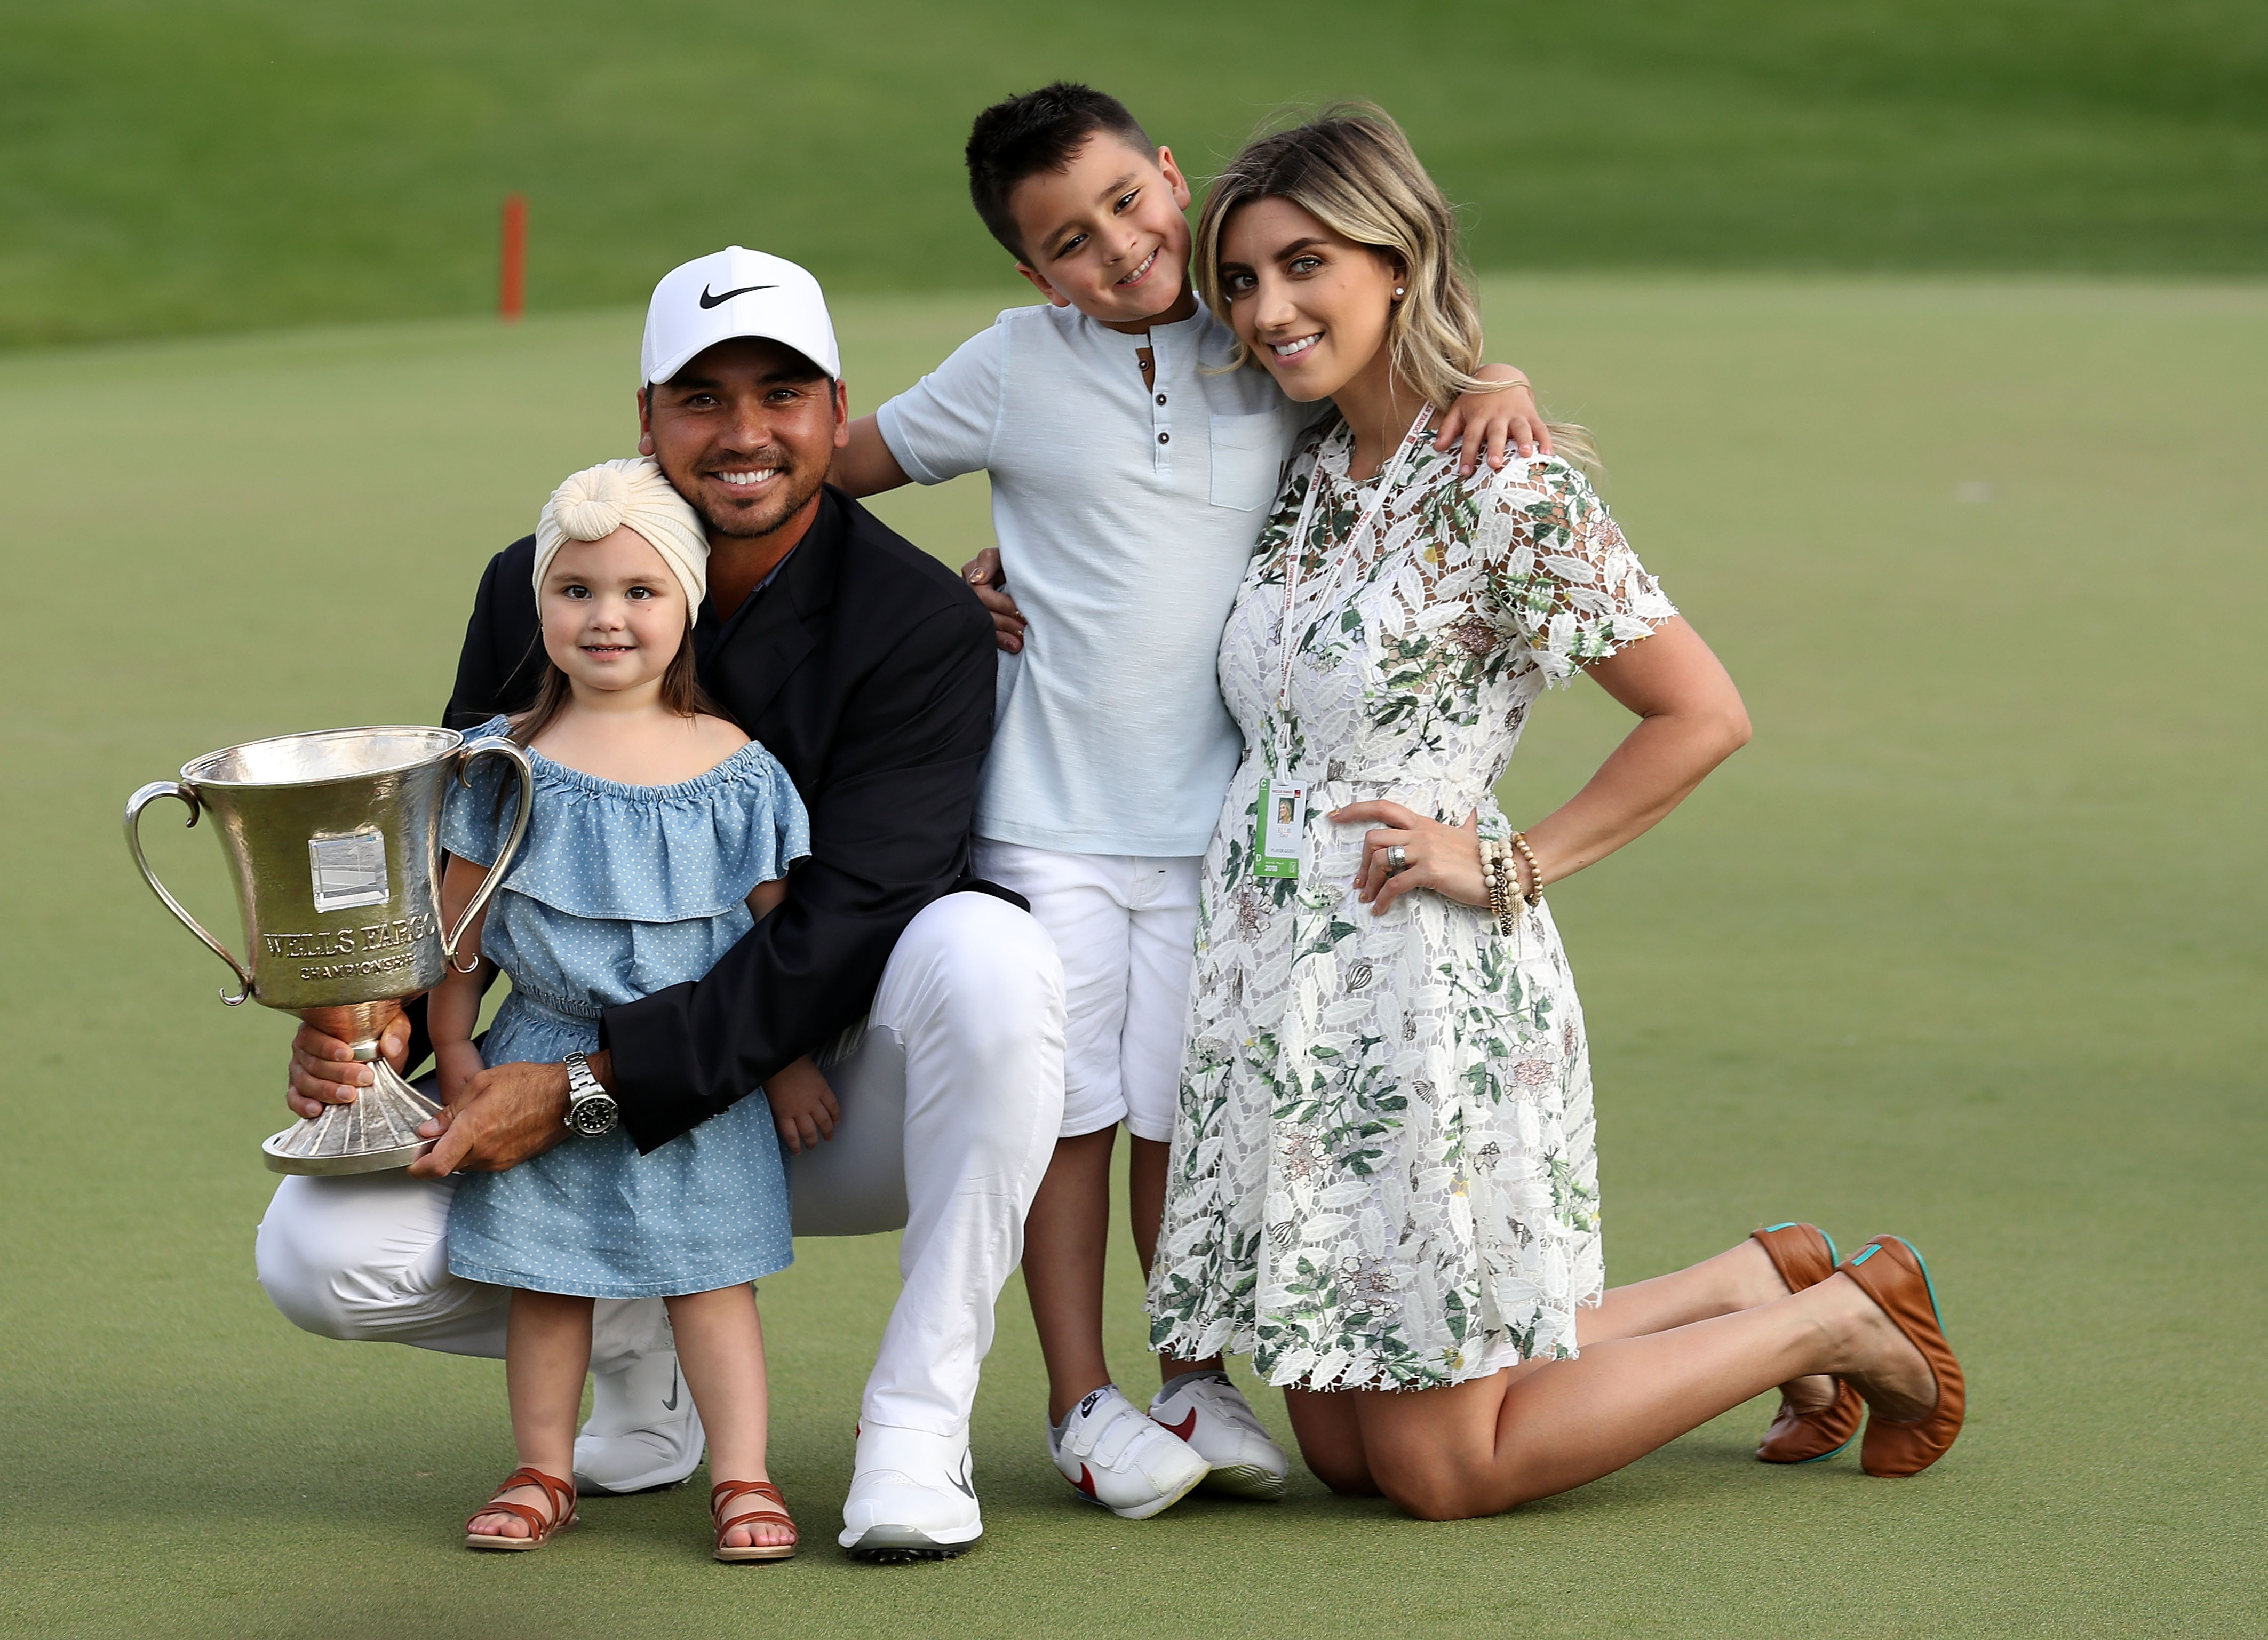 Here are some PGA Tour parents who share their careers with their kids